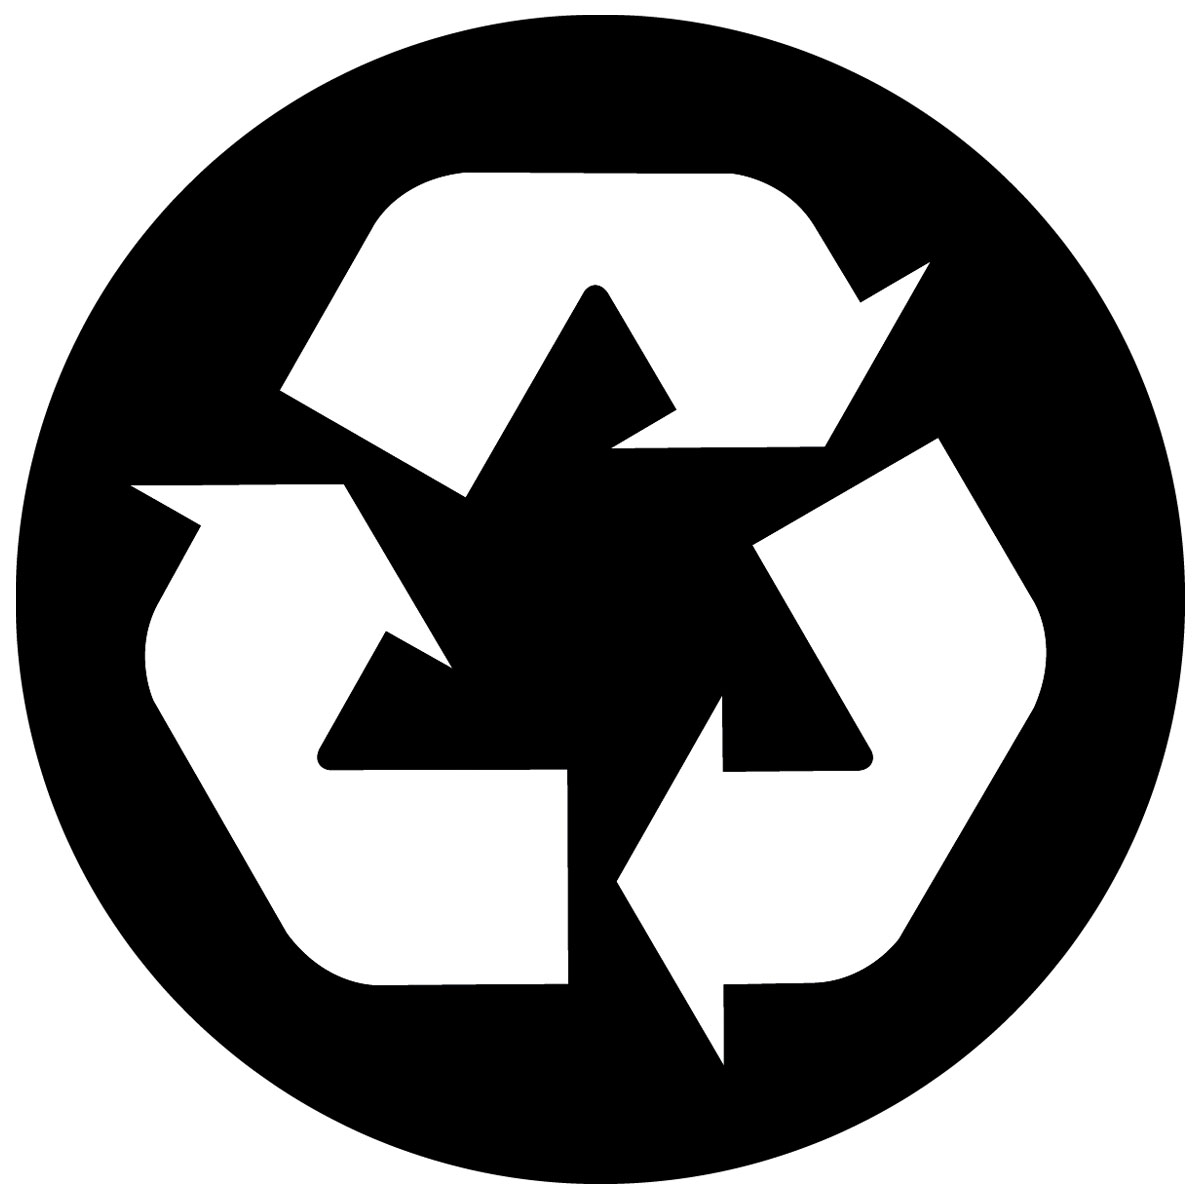 Image Of Recycle Symbol - Clipart library